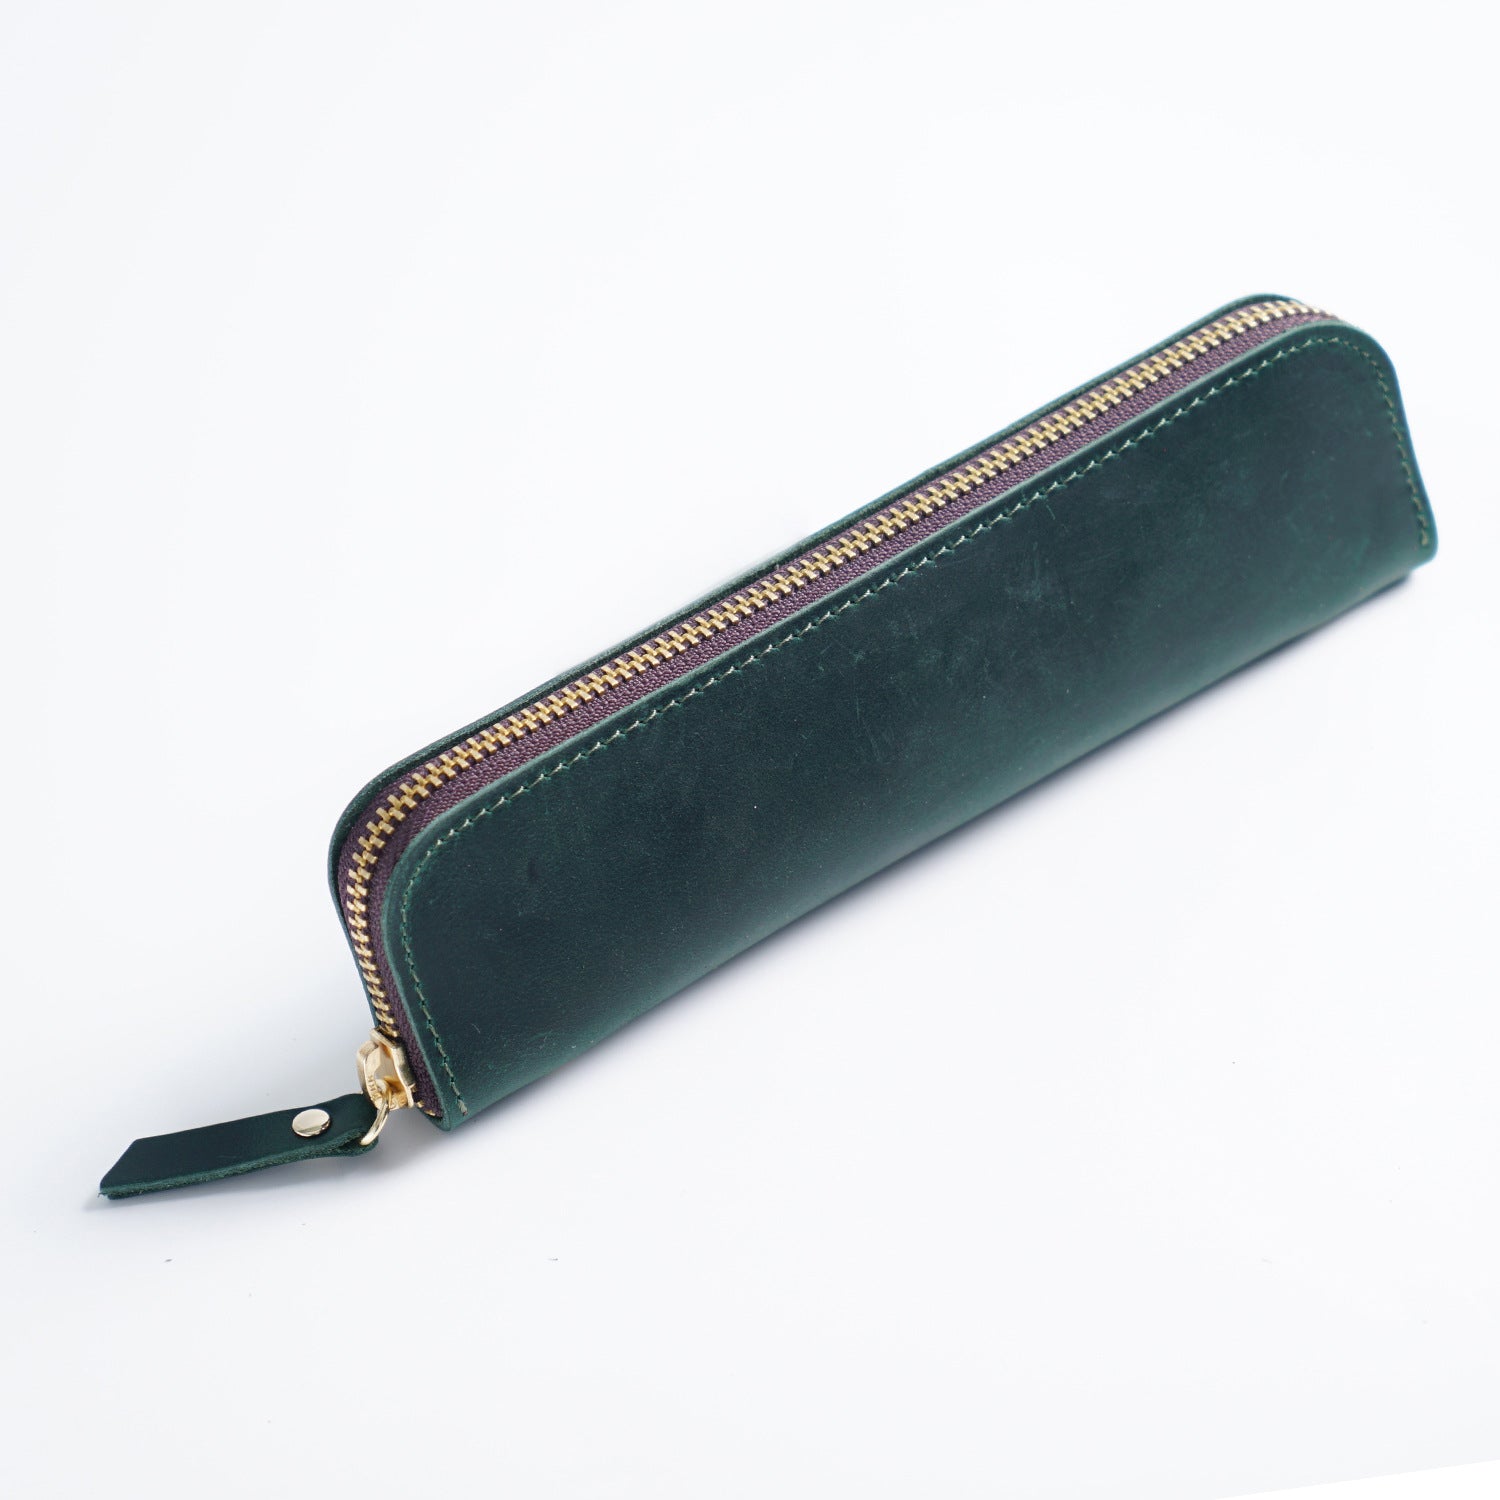 4 Divided Slots Zippered Leather Fountain Pen Case Pouch